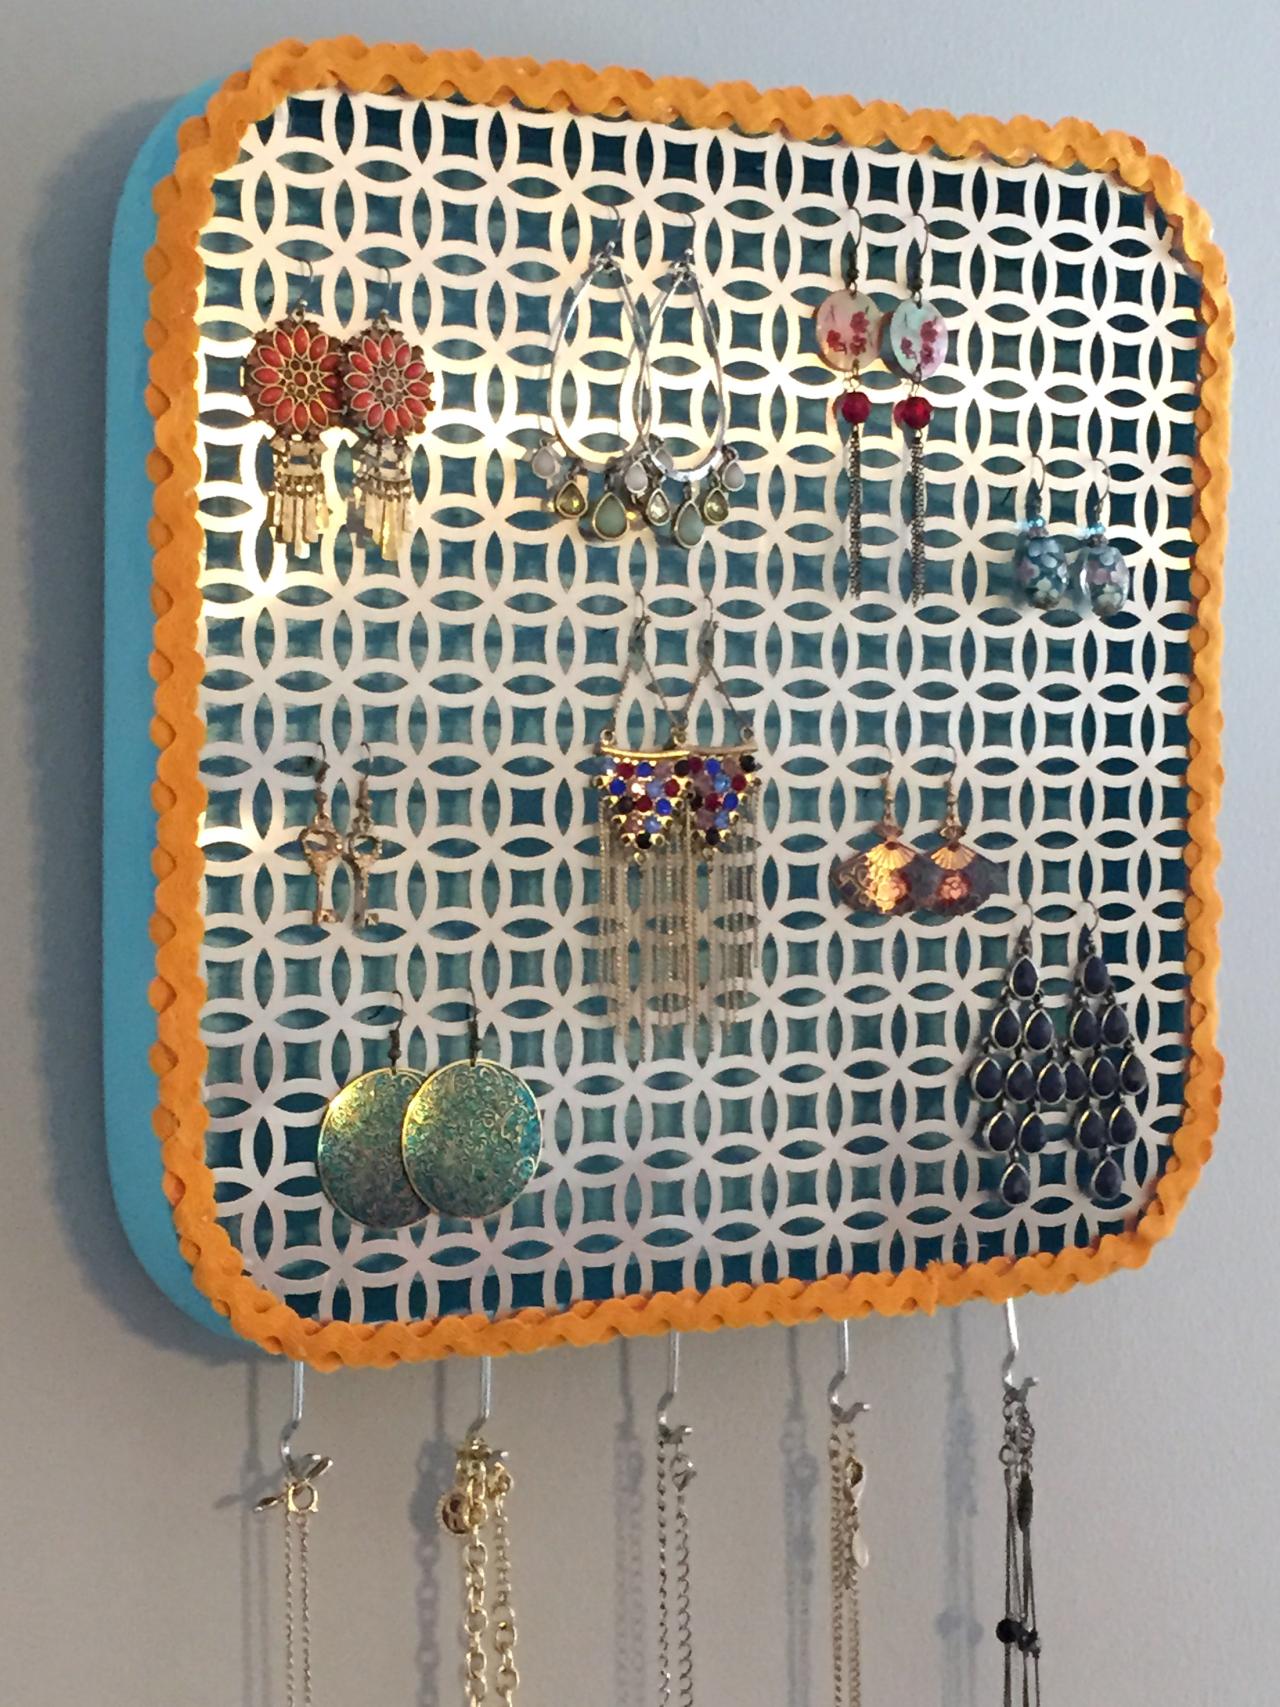 How To Make A Diy Wall Jewelry Organizer Hgtv S Decorating